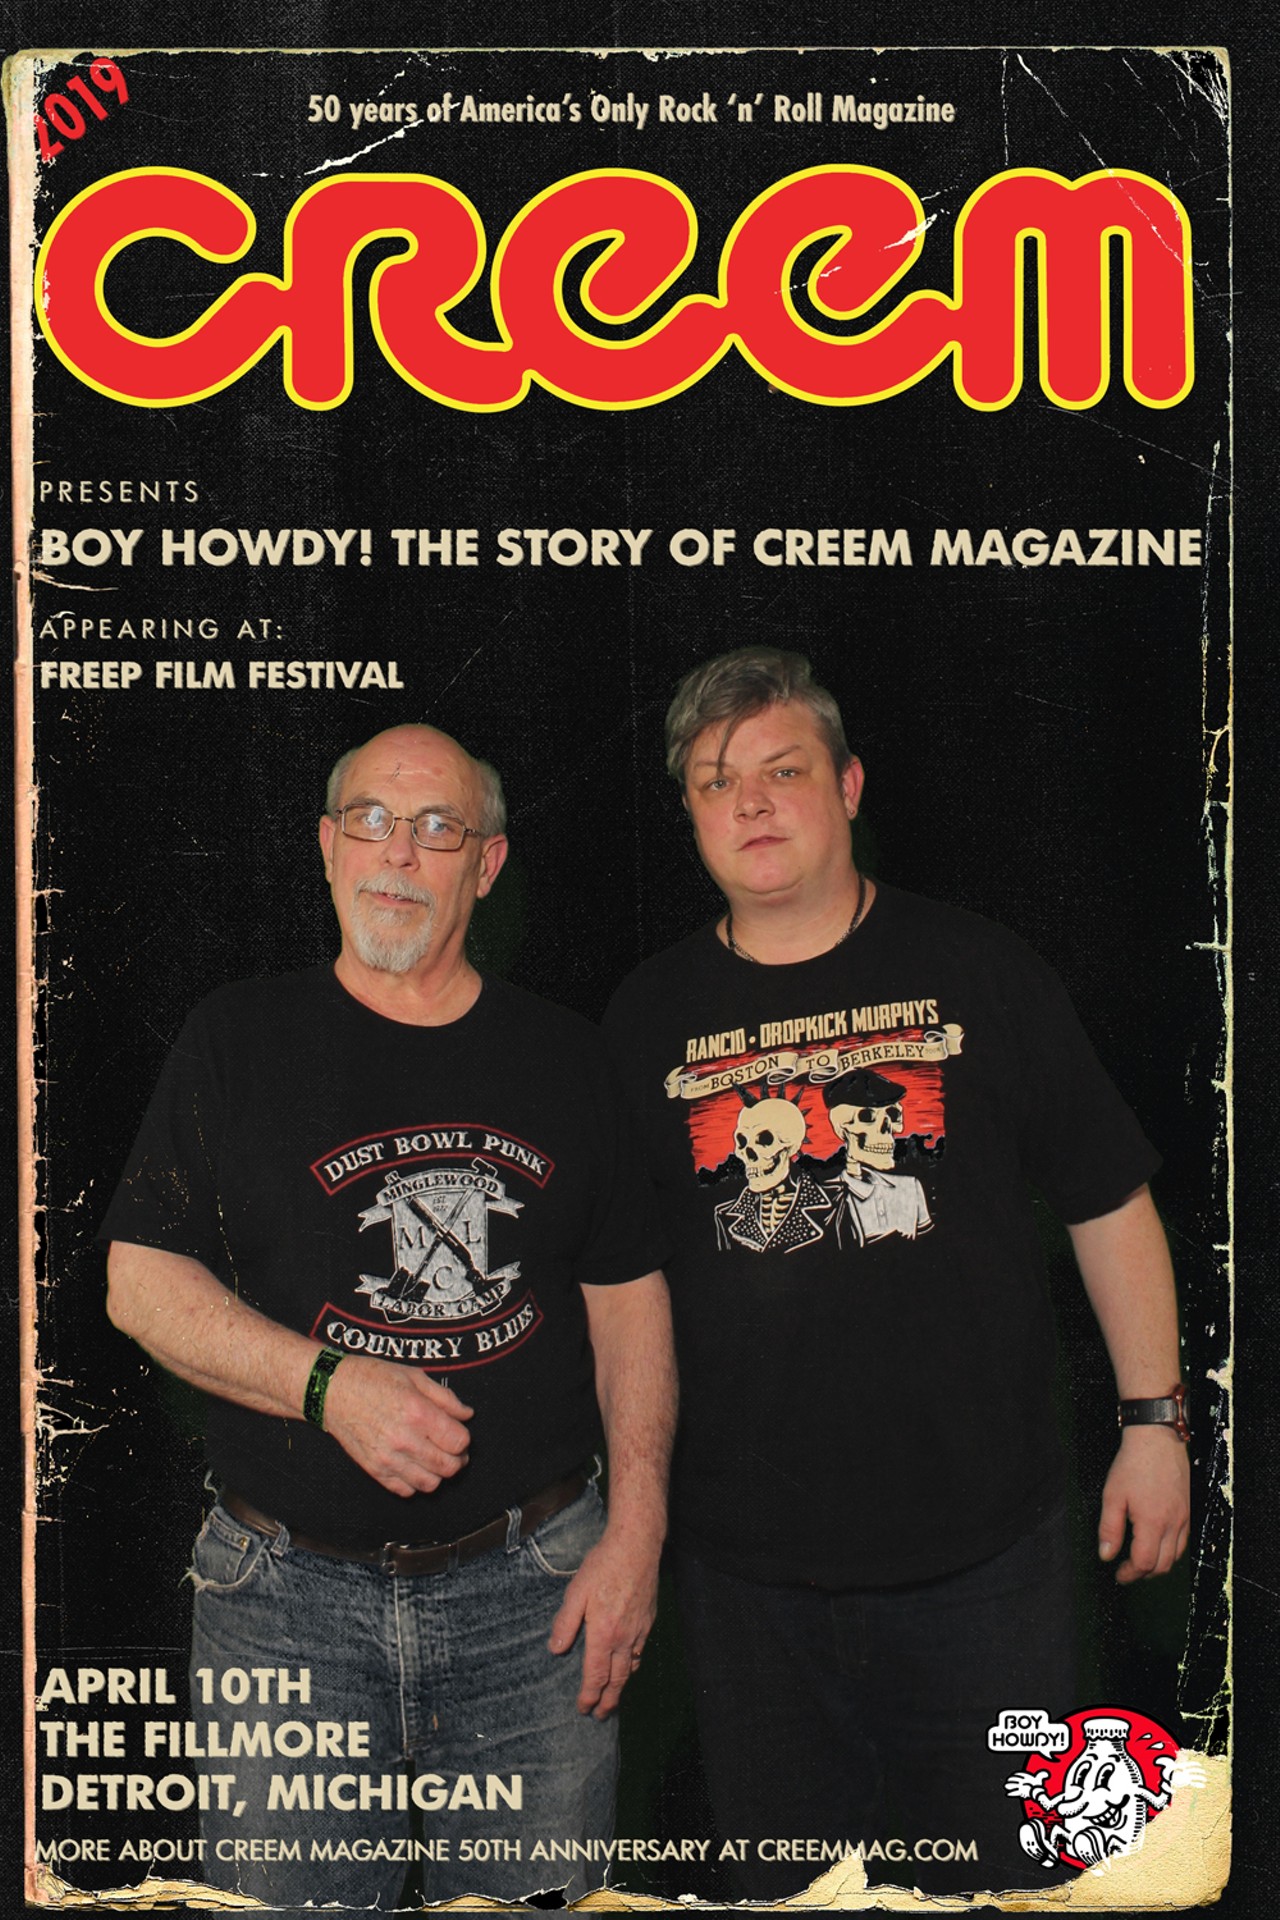 'Creem' doc premiere let attendees be on the cover of 'America's Only Rock 'n' Roll Magazine'